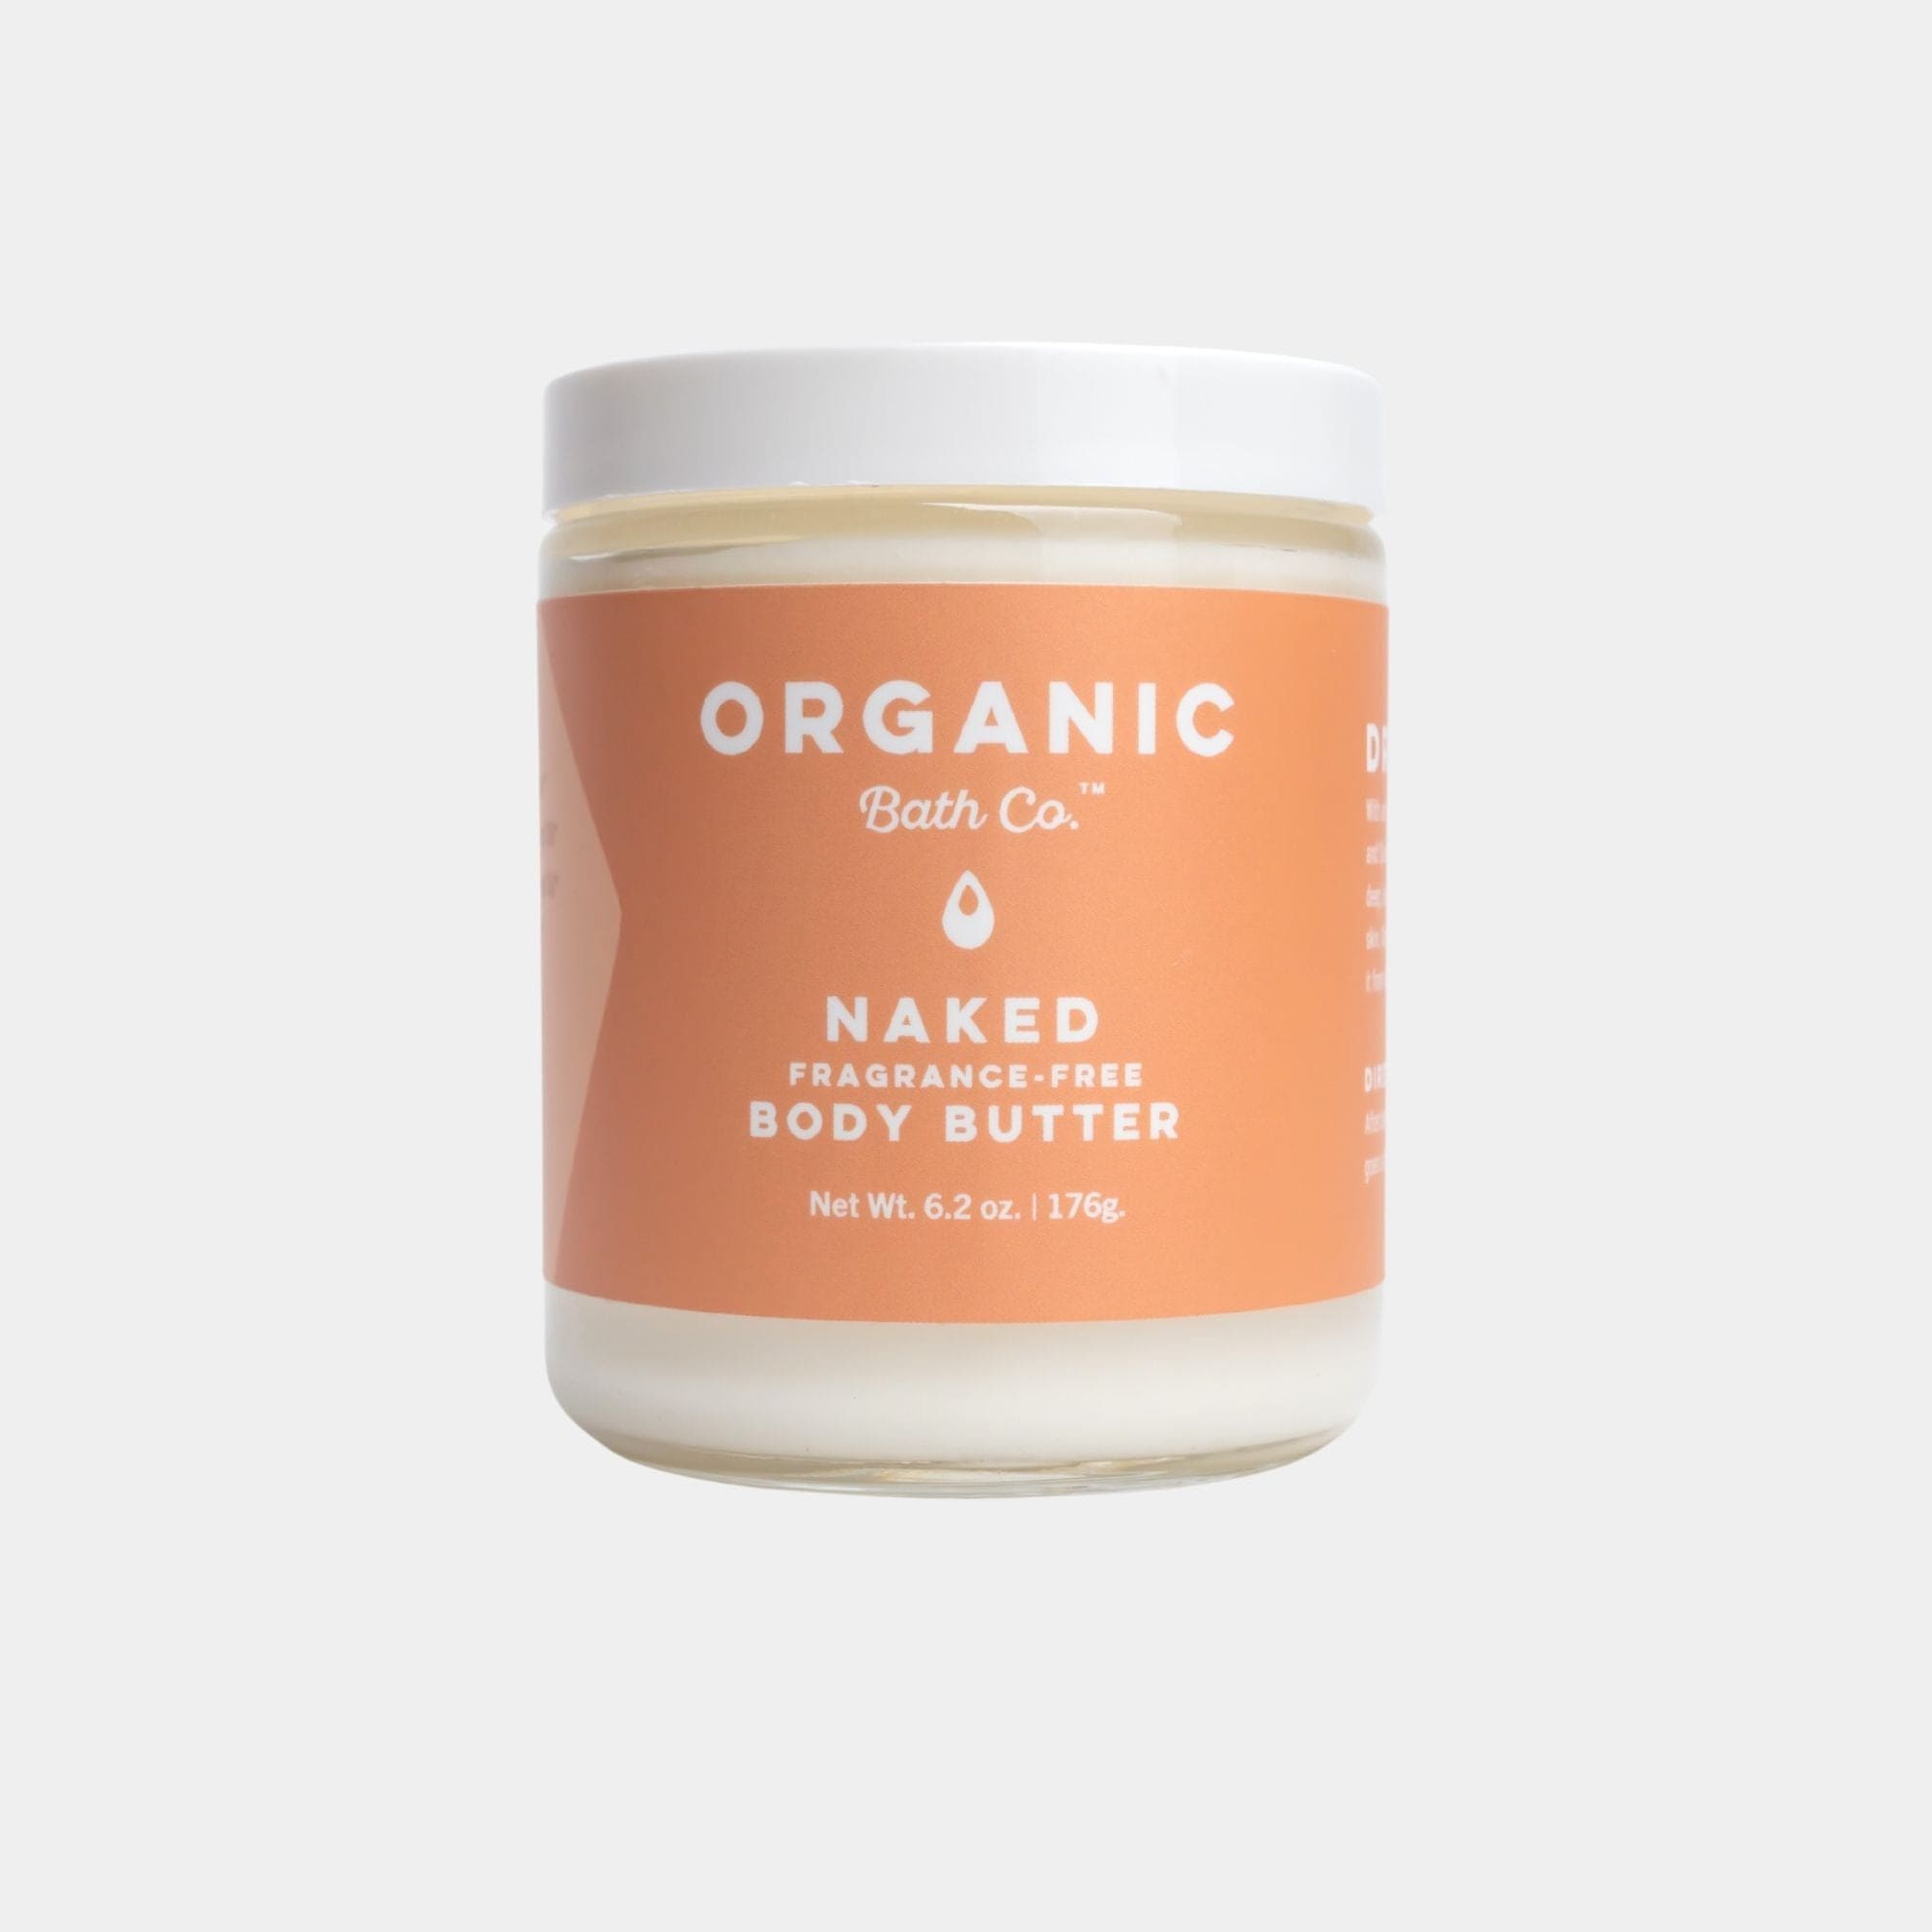 https://cdn.shopify.com/s/files/1/0283/6308/products/naked-organic-unscented-body-butter-351901.jpg?v=1696373520